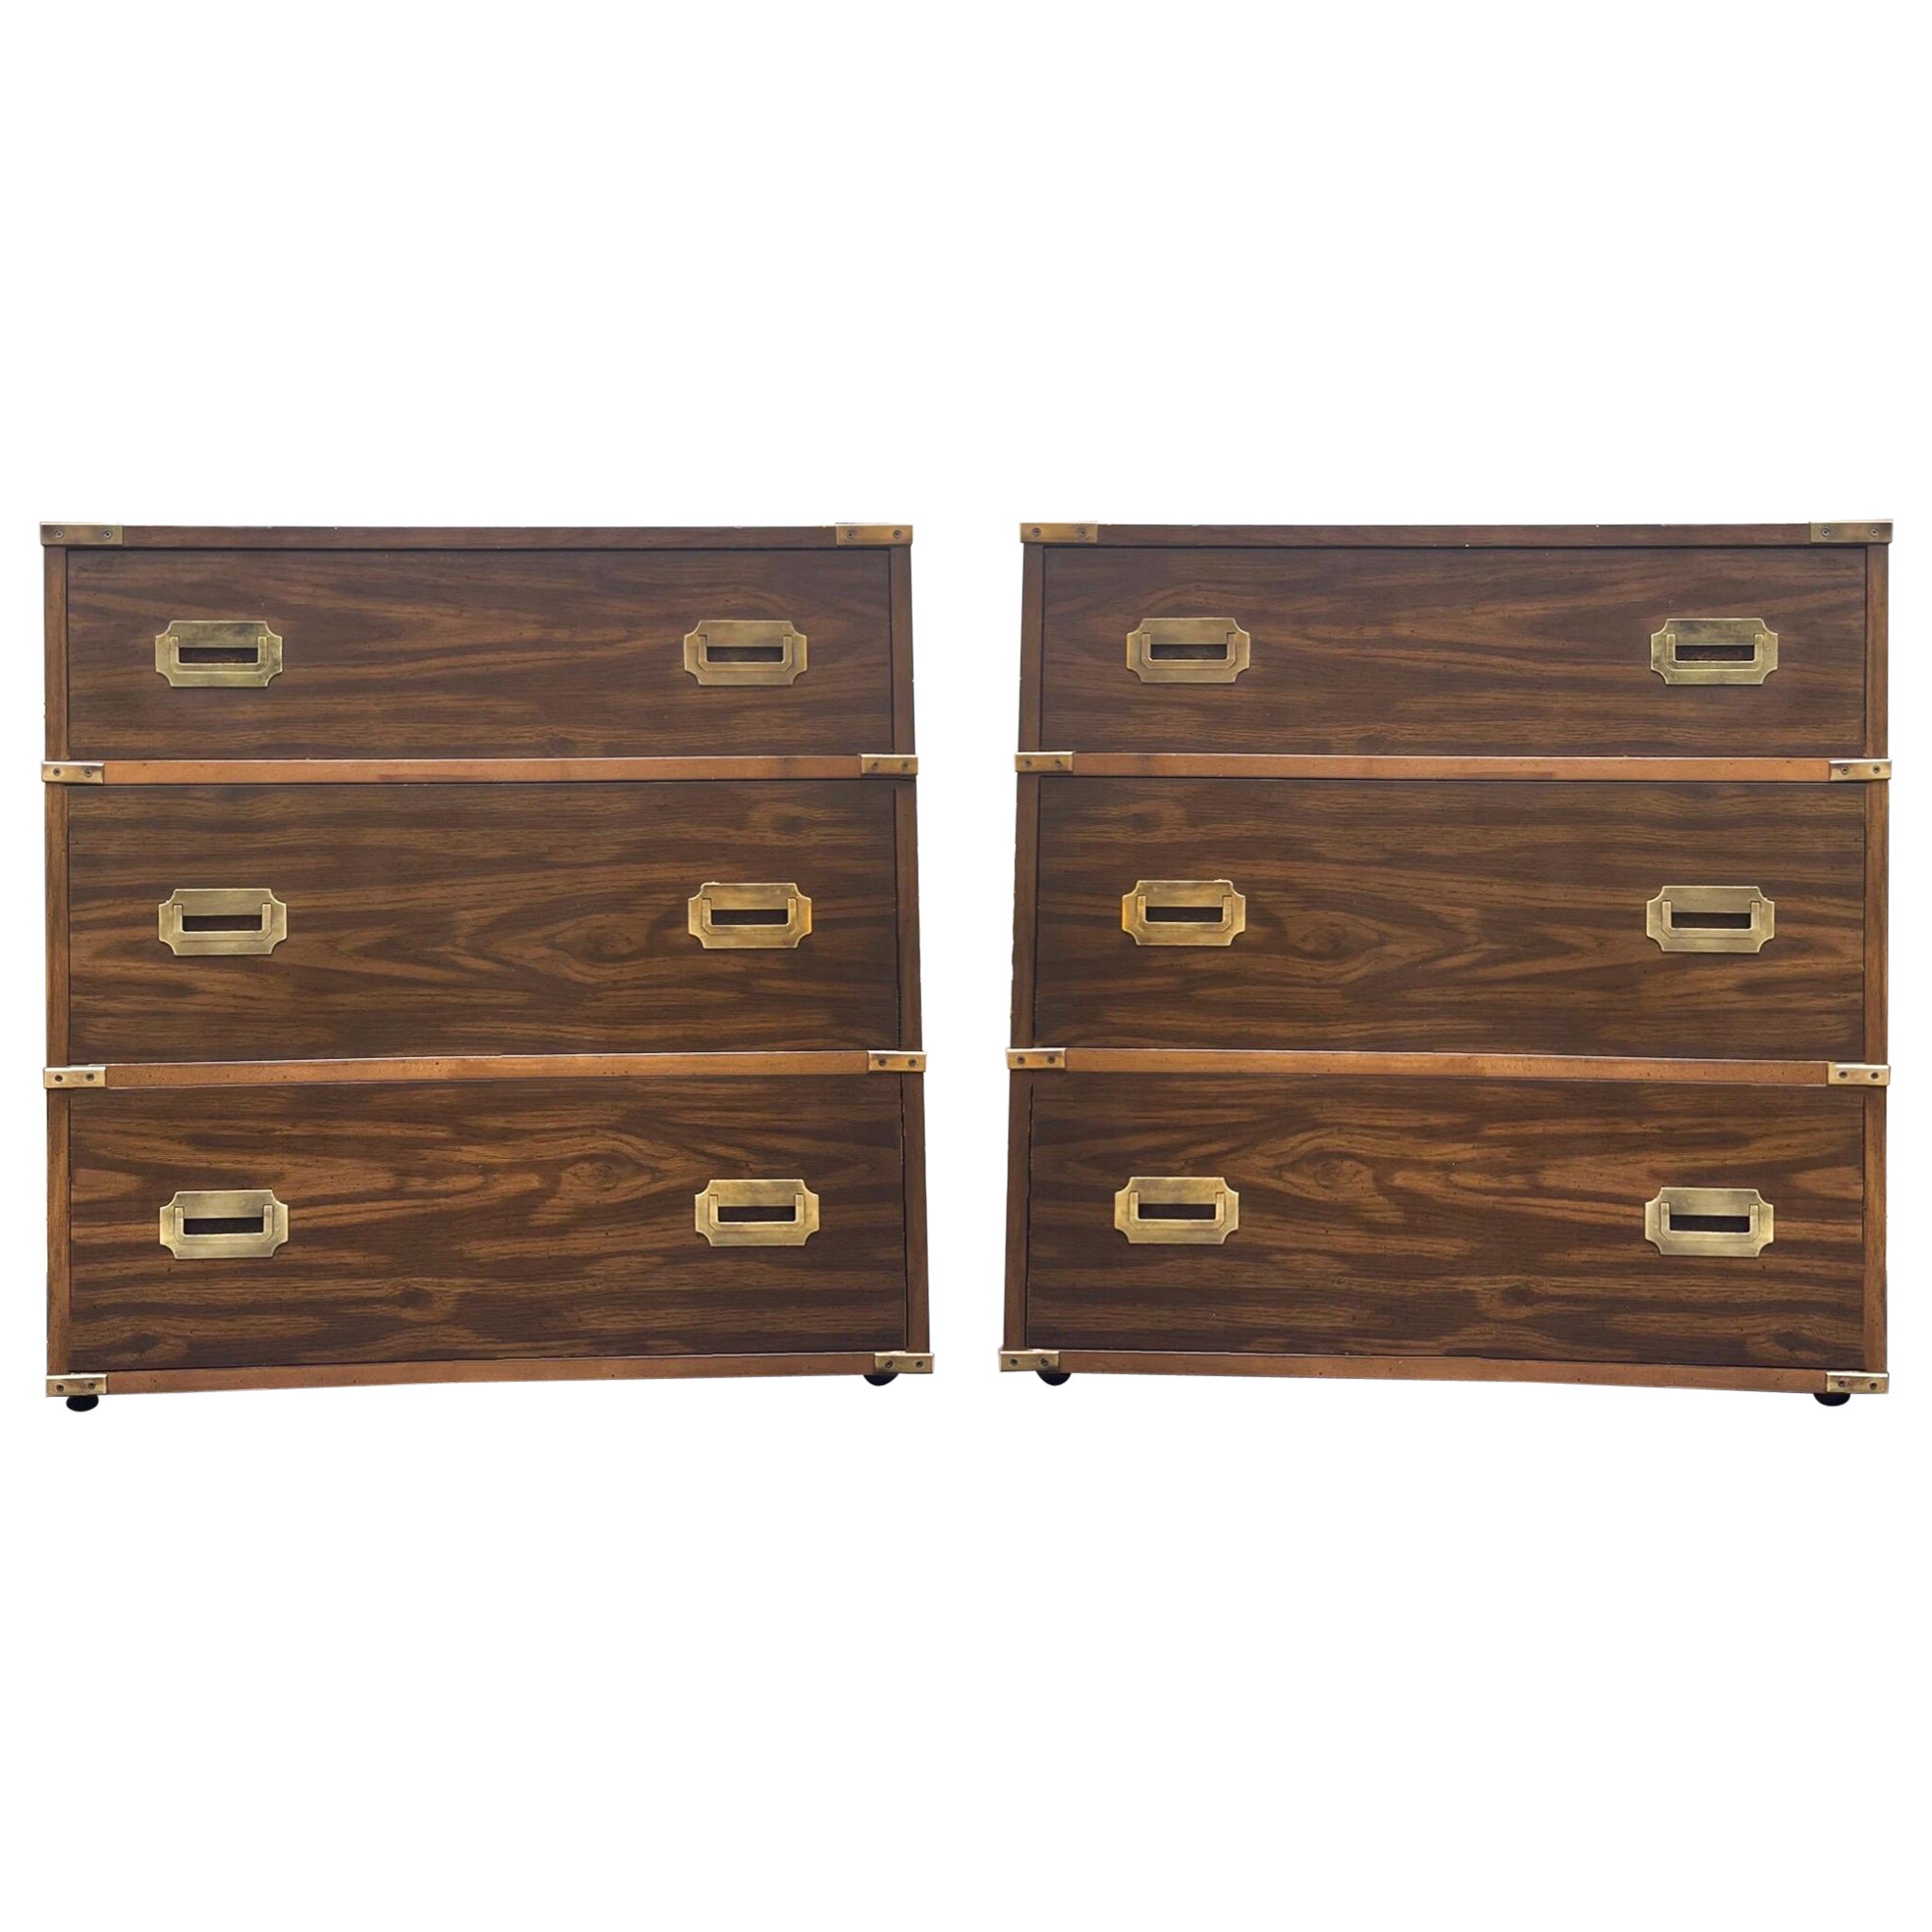 1970s Campaign Style Chests with Oak Finish Attributed to Henredon